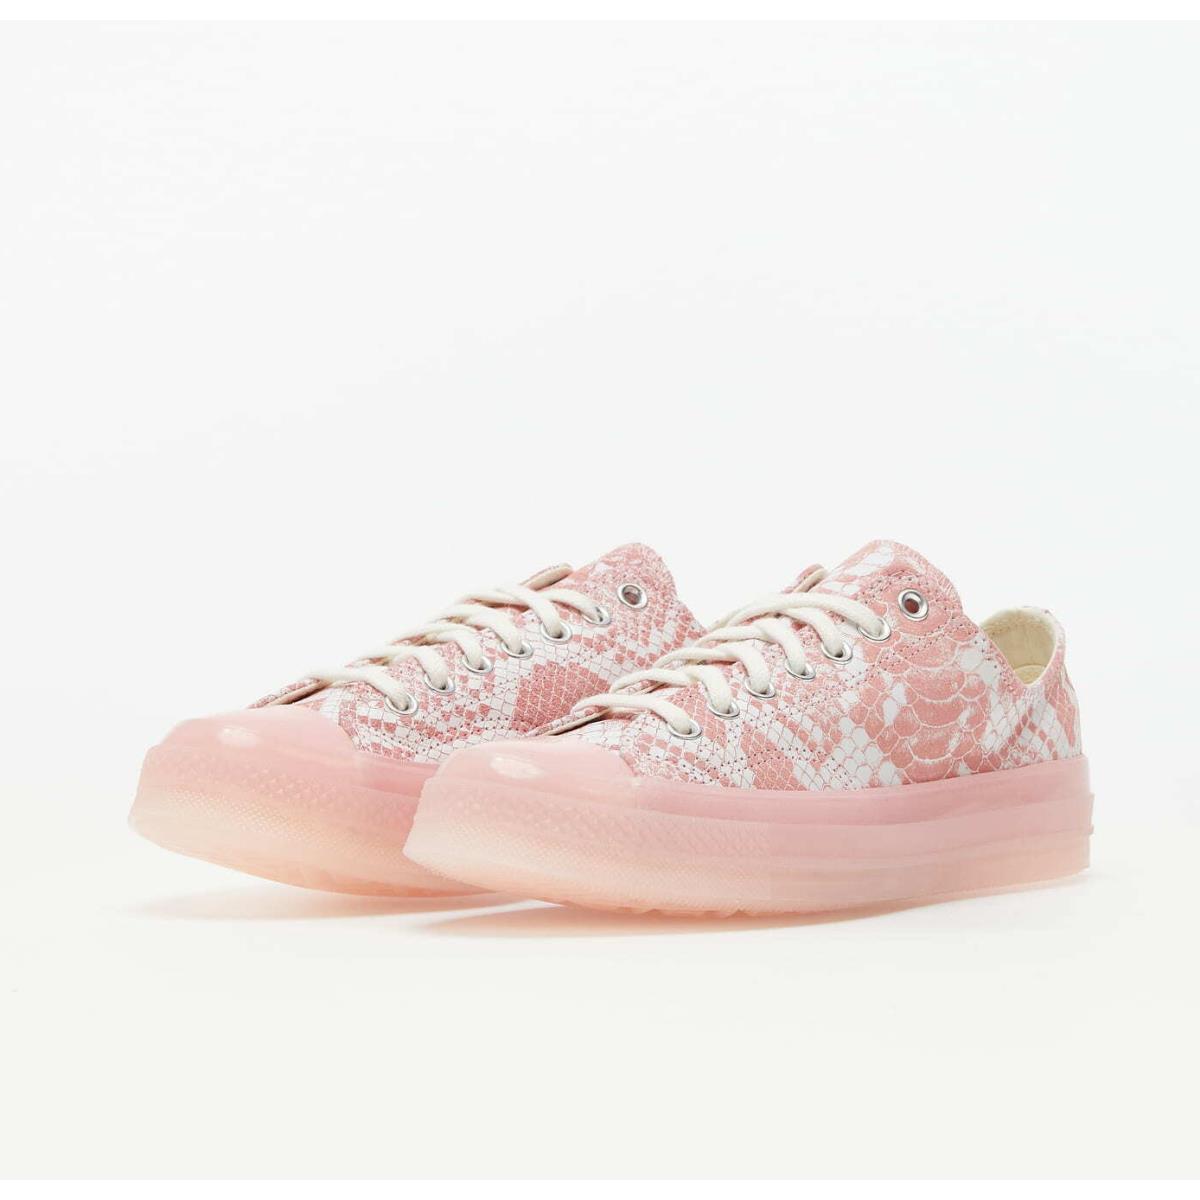 Converse x Golf Wang Chuck 70 Python 173189C Pink Unisex Low Shoes Sneakers